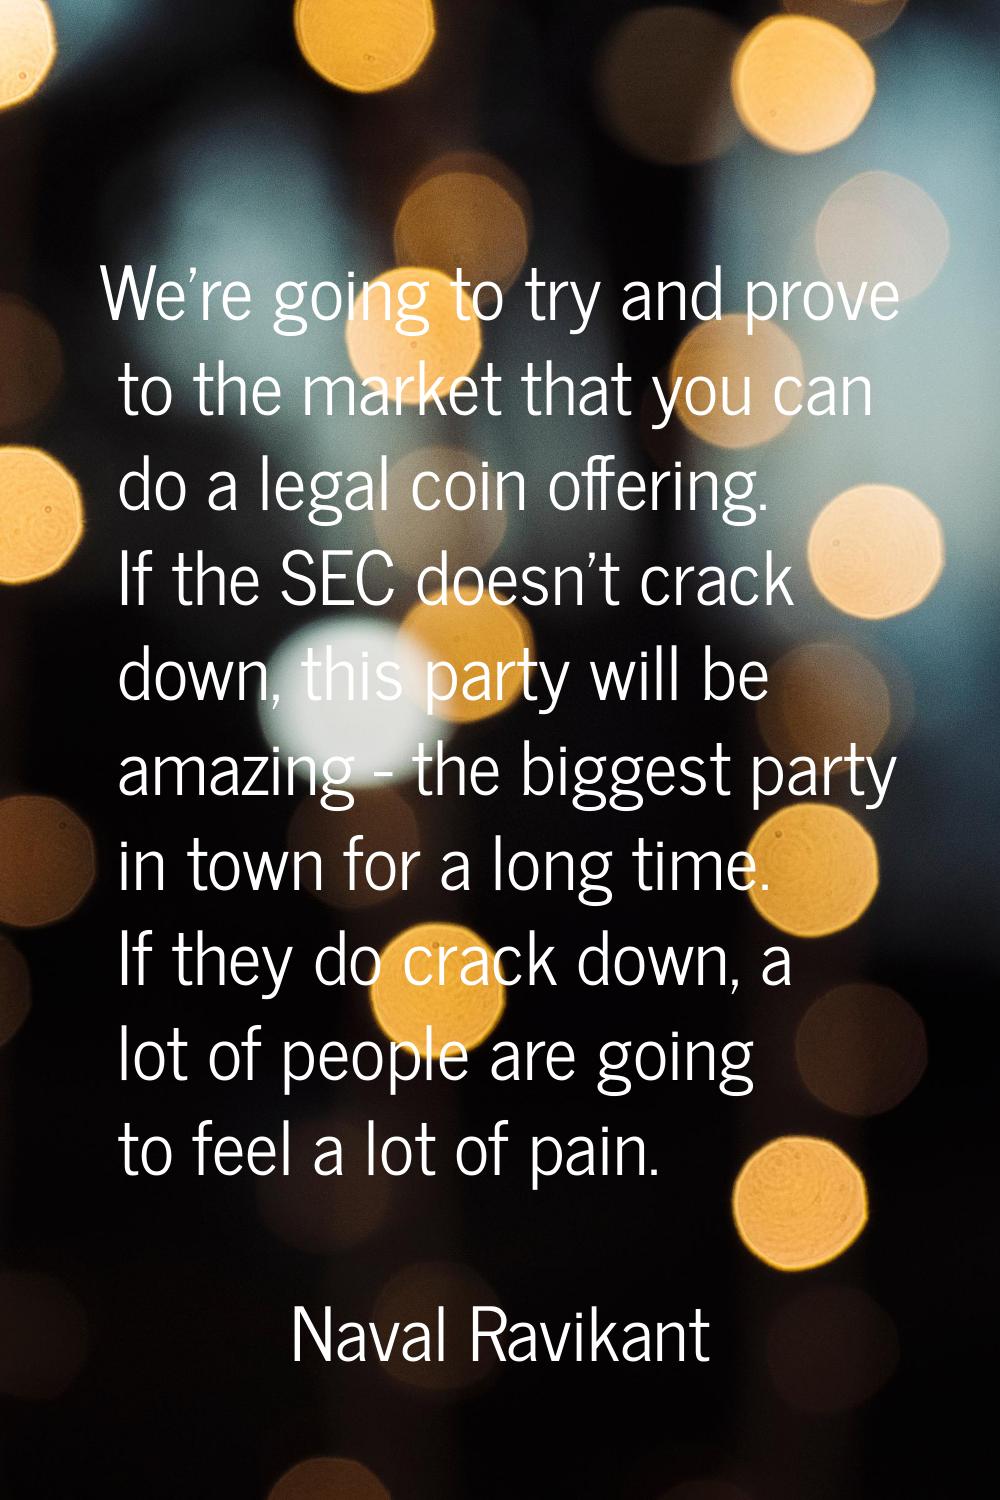 We're going to try and prove to the market that you can do a legal coin offering. If the SEC doesn'